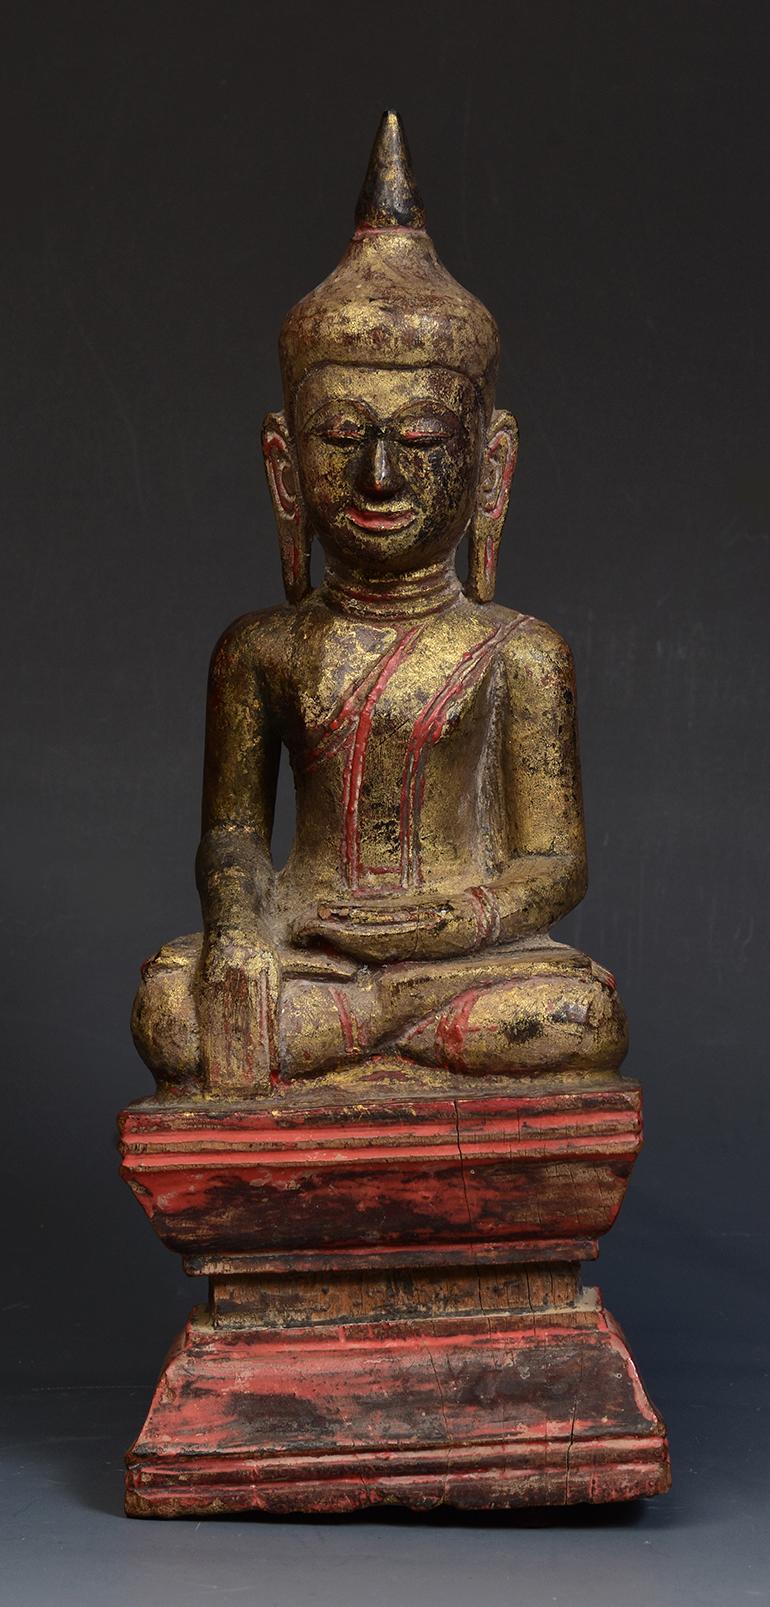 Thai wooden Buddha sitting in Mara Vijaya (calling the earth to witness) posture on a base.

Age: Thailand, 19th Century
Size: Height 24.9 C.M. / Width 19.5 C.M.
Condition: Nice condition overall (some expected degradation due to its